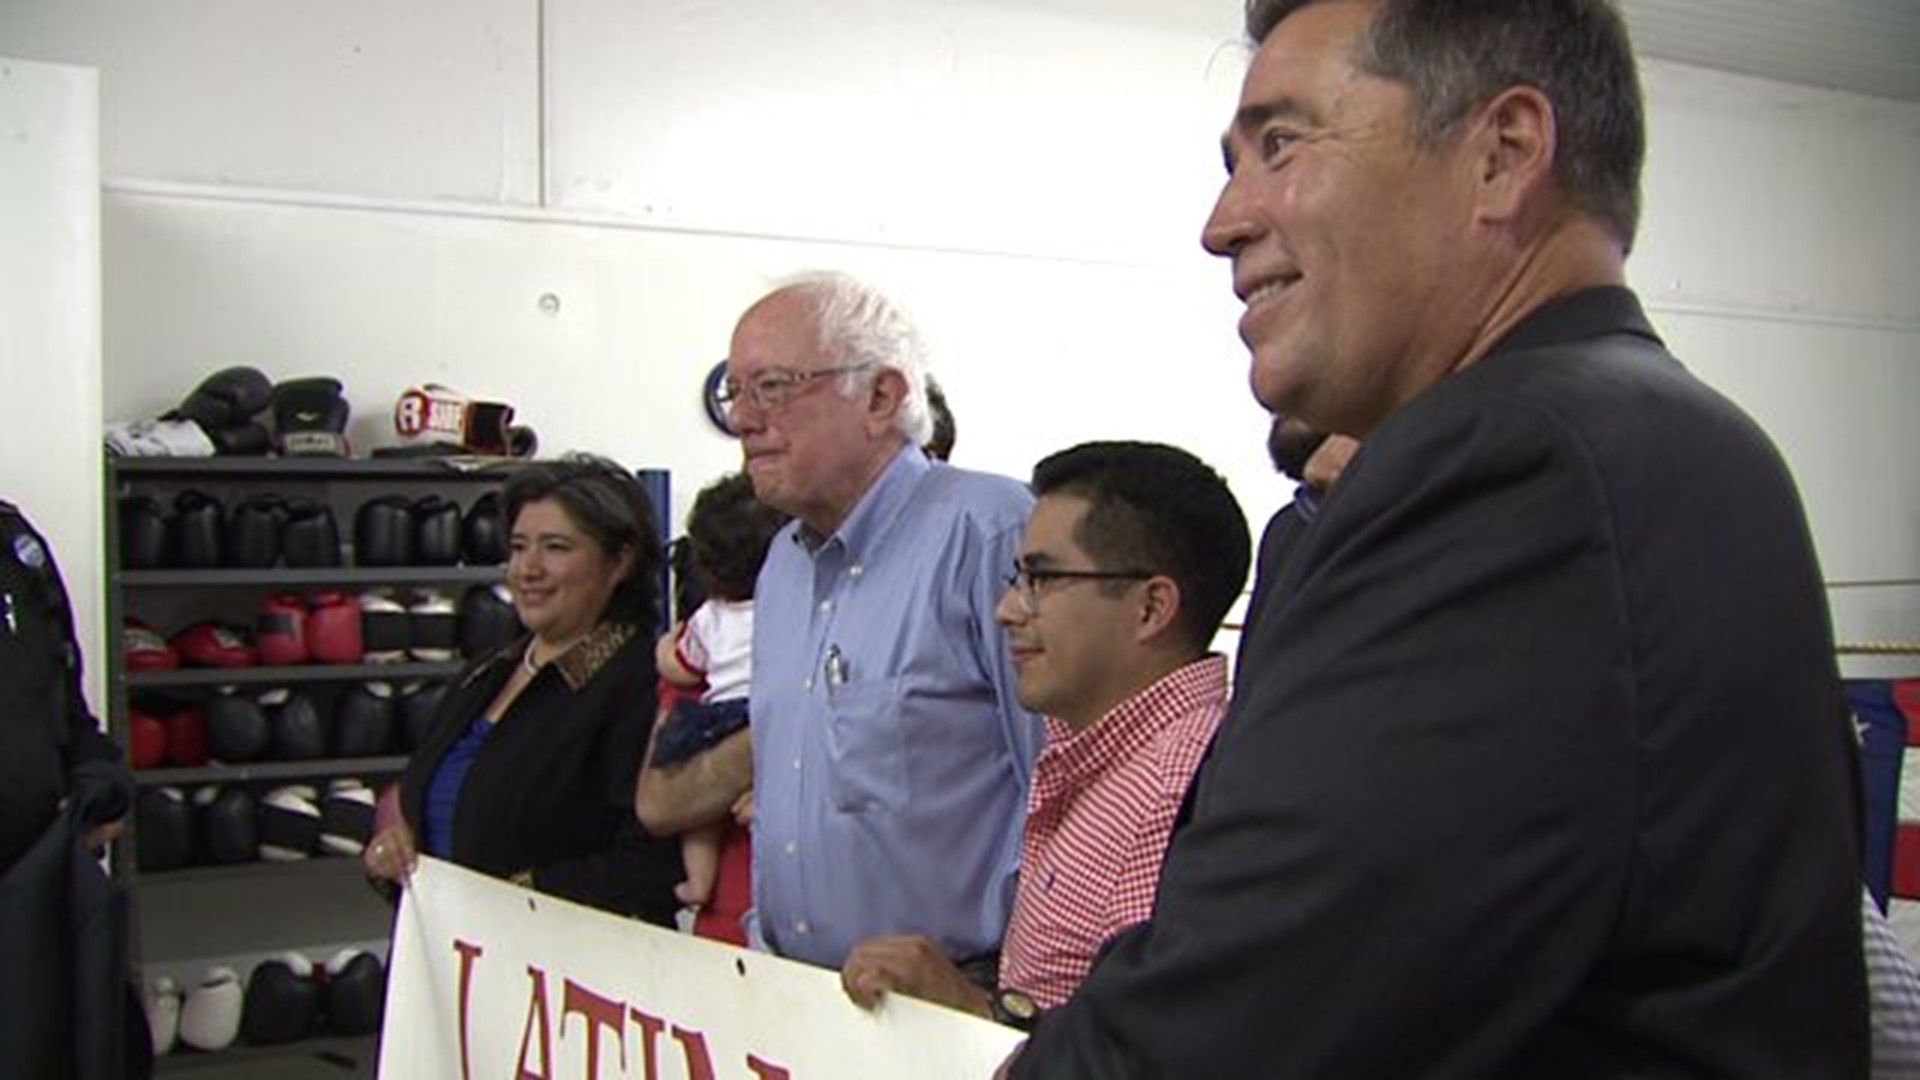 Bernie Sanders stumps for Latino vote while in Muscatine